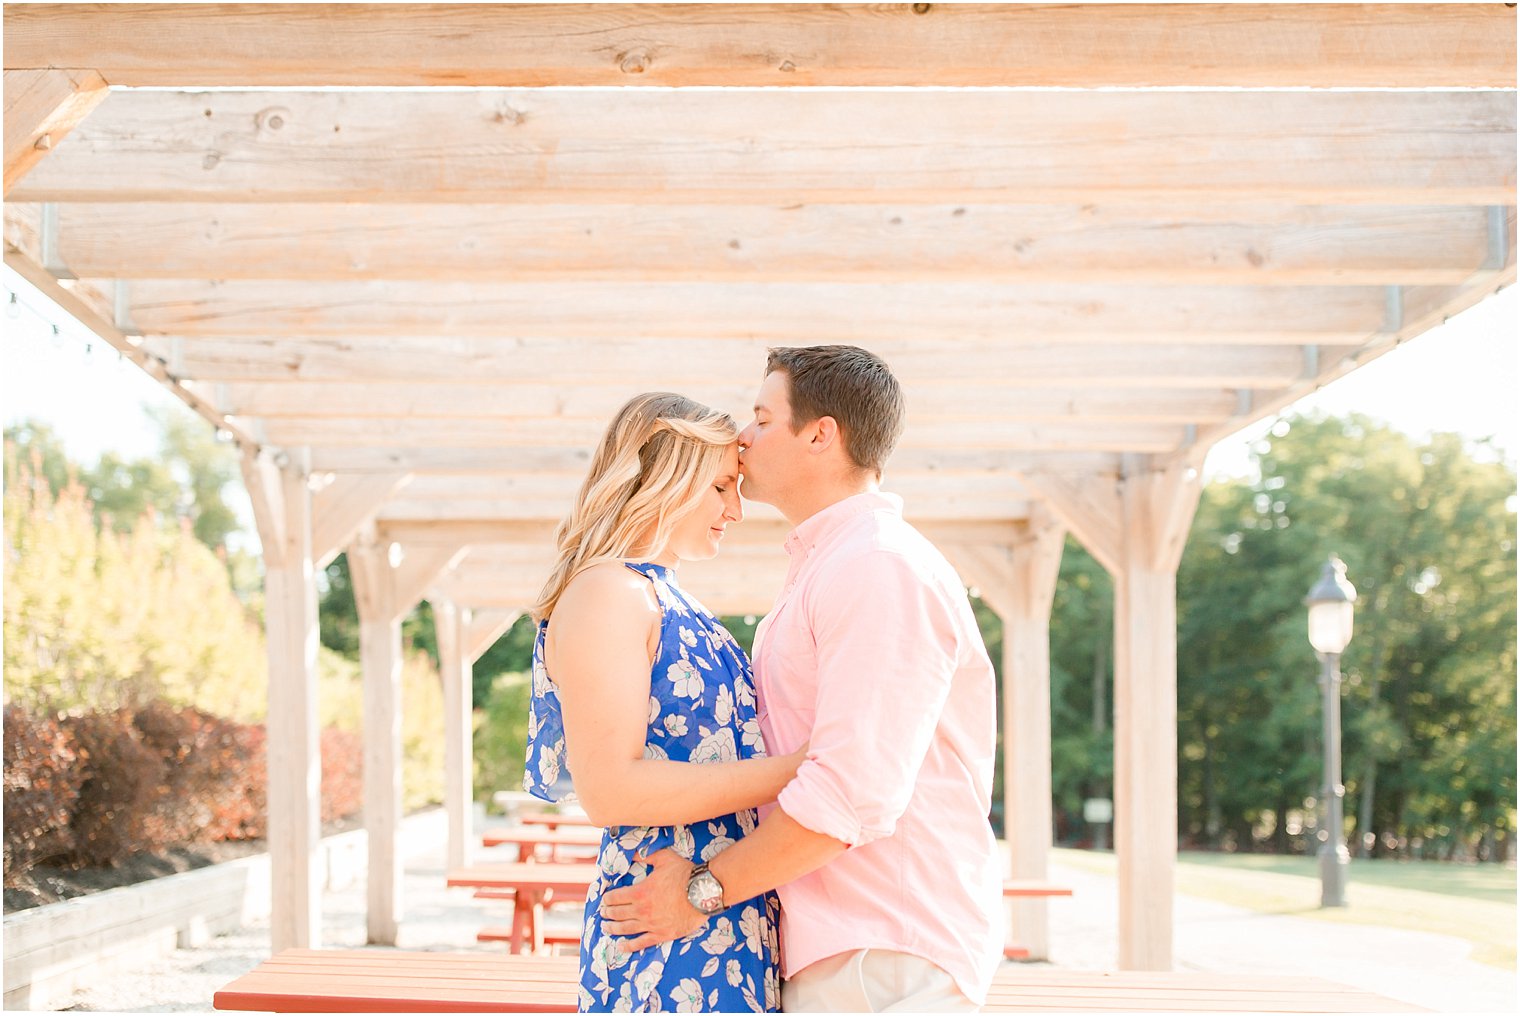 Groom-to-be gives bride-to-be a kiss on the forehead at Laurita Winery